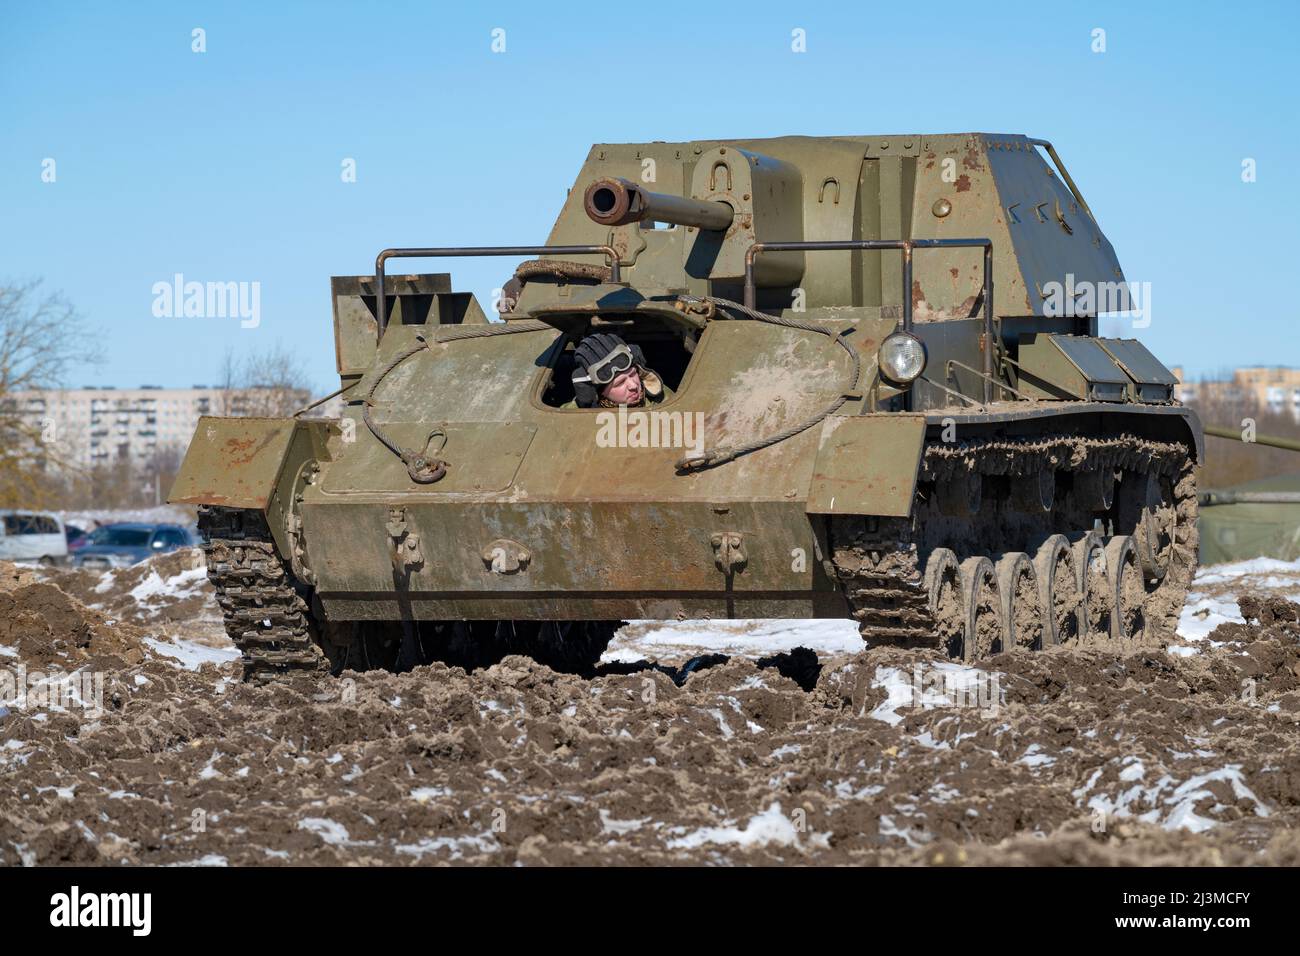 KRASNOE SELO, RUSSIA - MARCH 27, 2022: A driver looks out of the hatch of the old soviet self-propelled artillery mount SU-76 on a sunny spring day Stock Photo